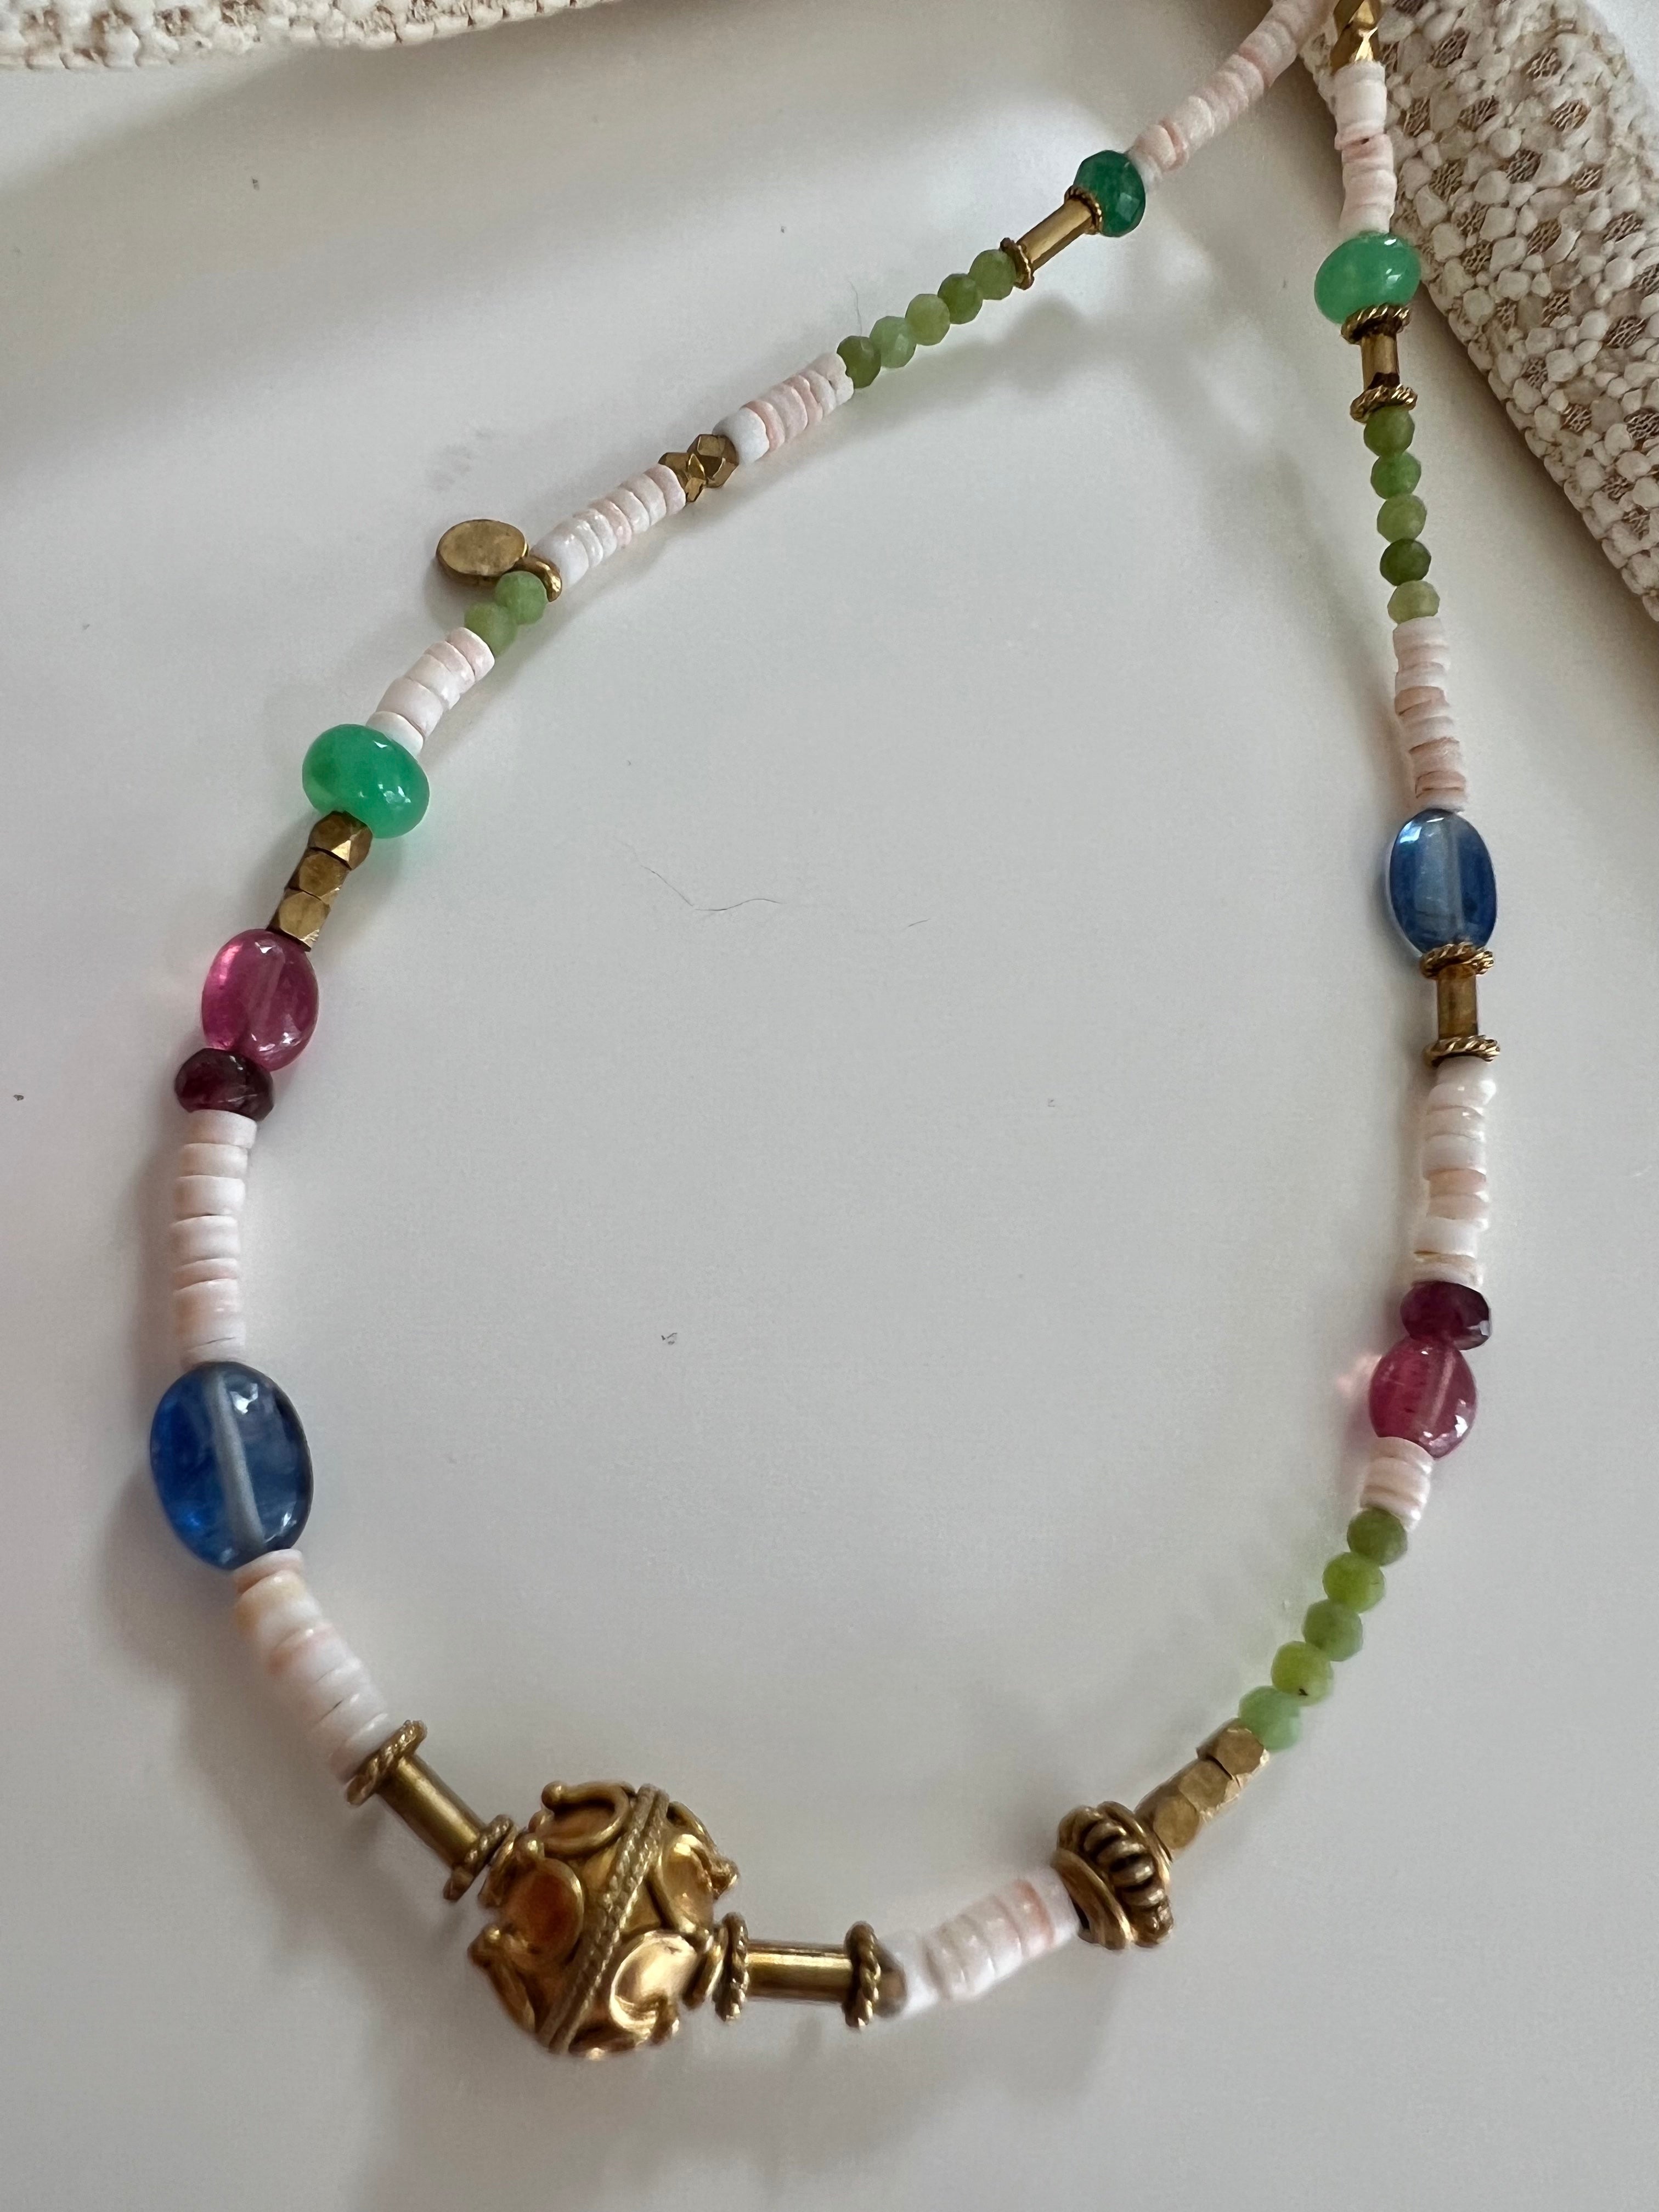 Mixed Pearl & Gold Bead Necklace